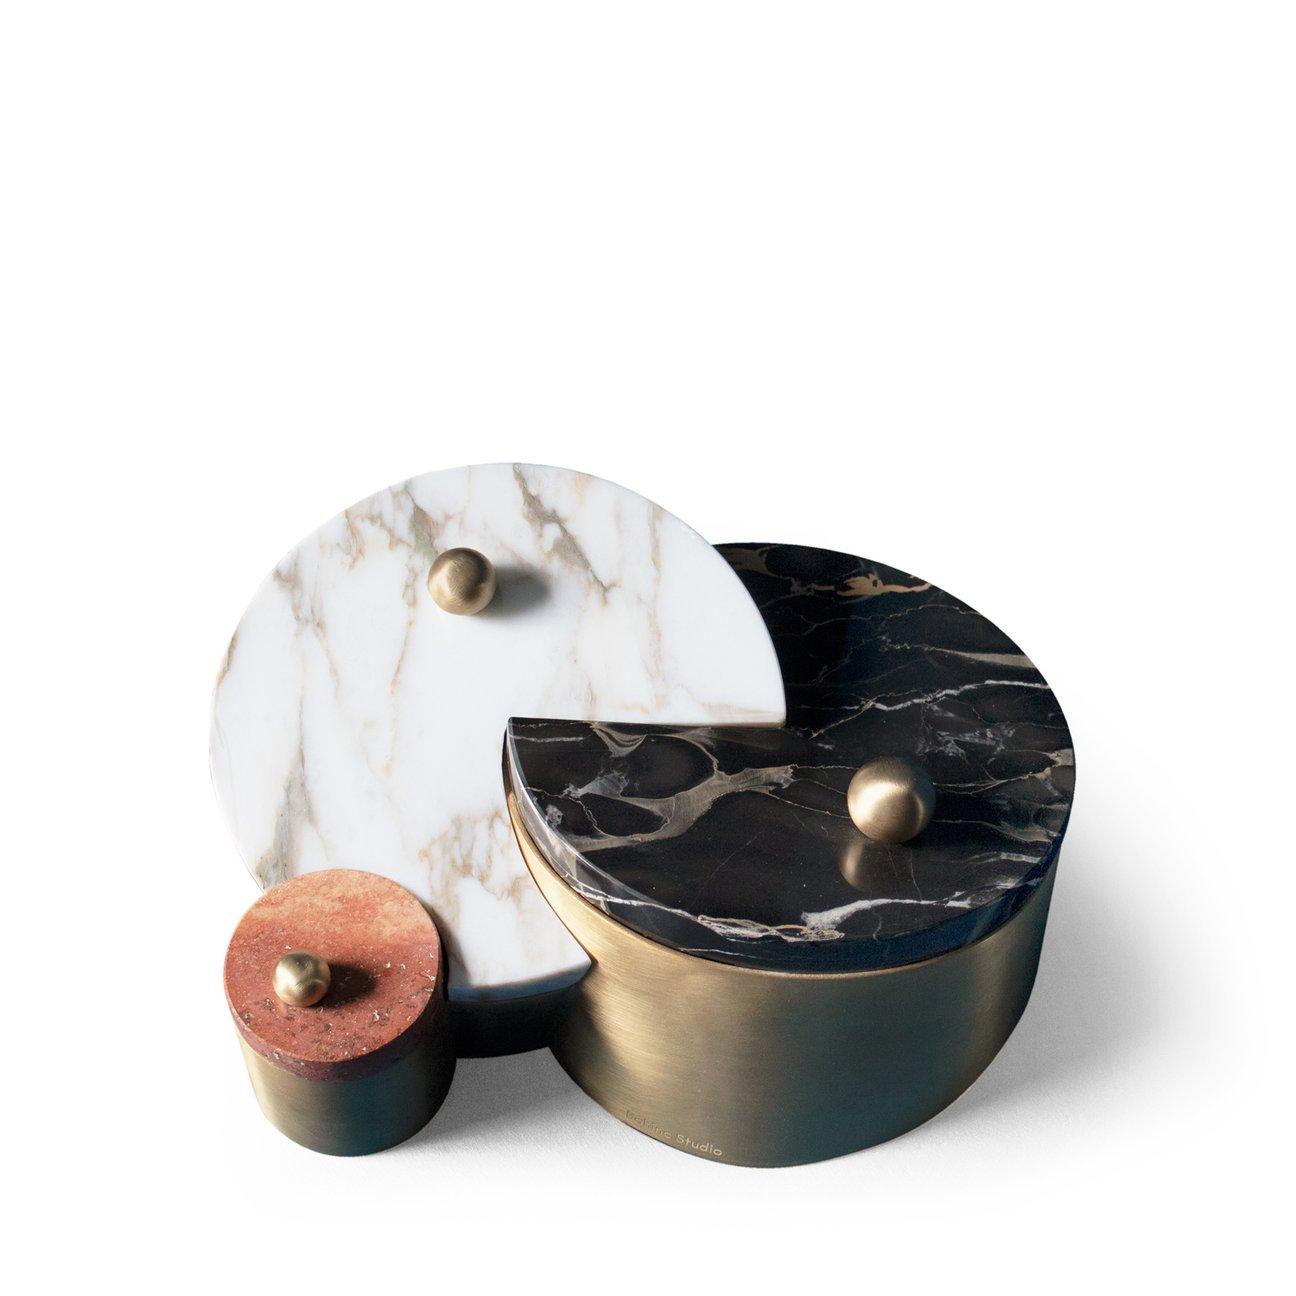 The box’s interlocking shapes reference this year’s exceptional planetary conjunction between Saturn and Pluto. The Saturn and Pluto box features three brass round compartments with tops in calacatta, red travertine and portoro marble.

Handmade in